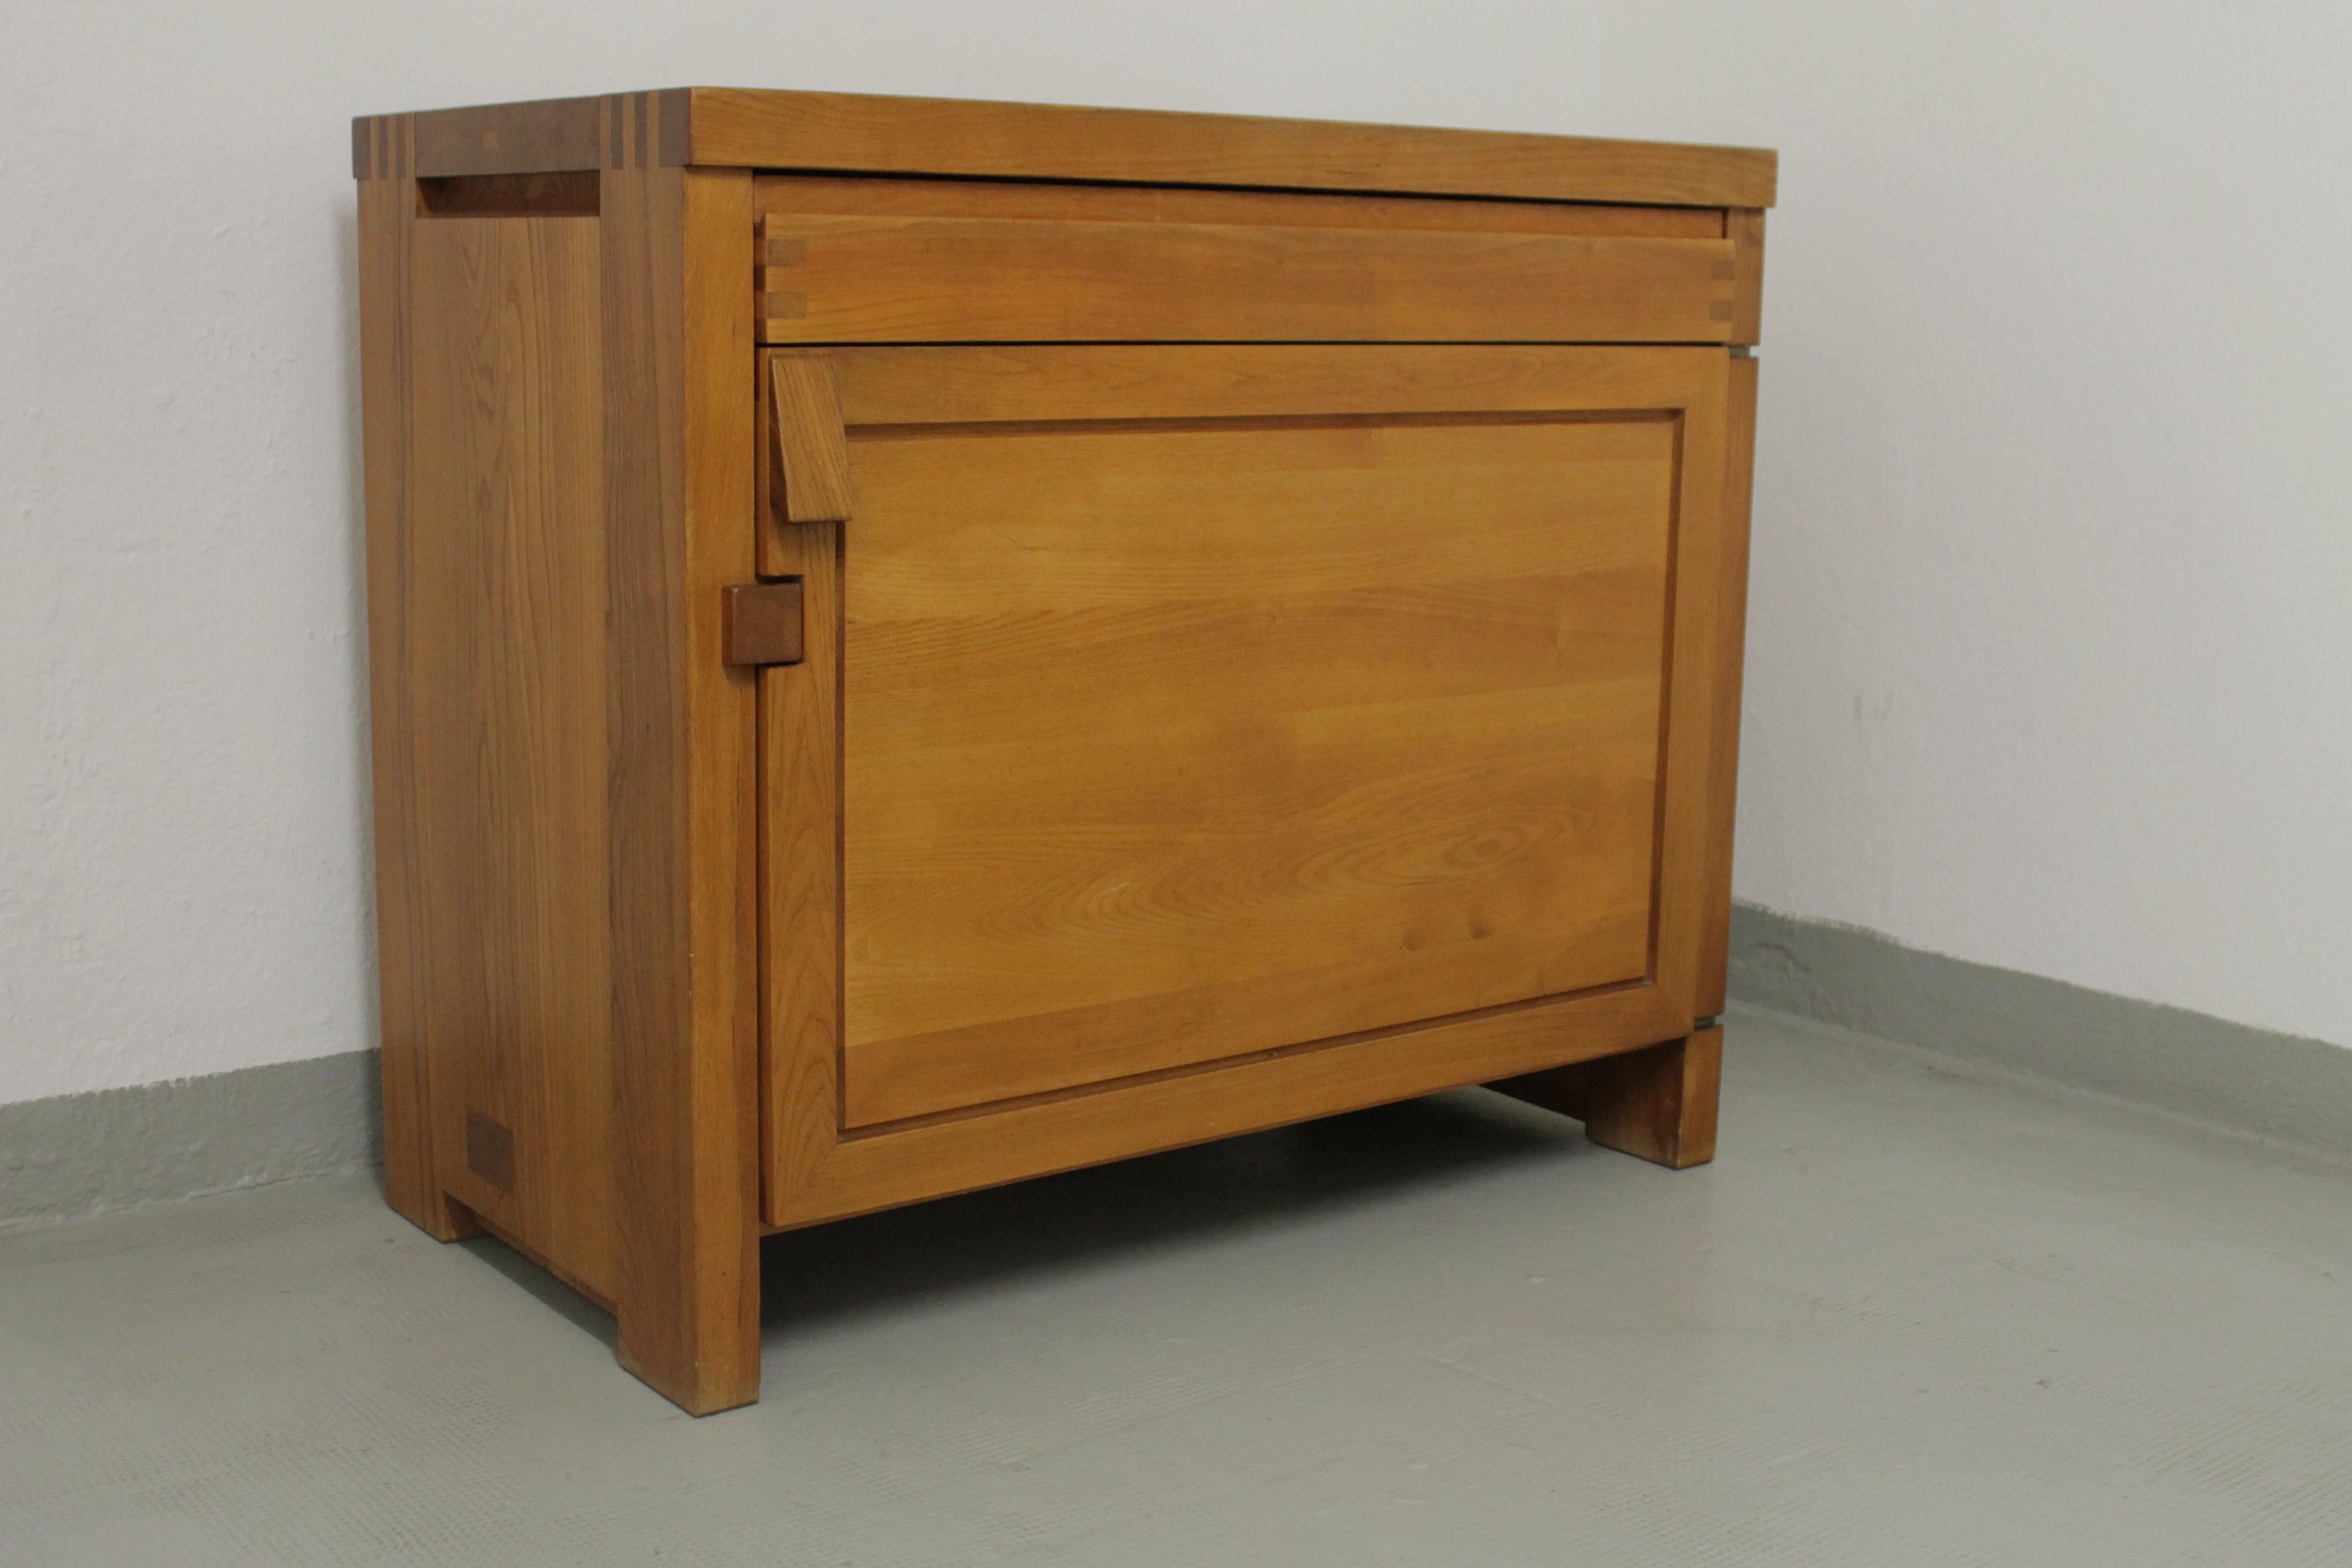 Solid elm cabinet by Pierre Chapo, France, circa 1970
Beautiful patina.